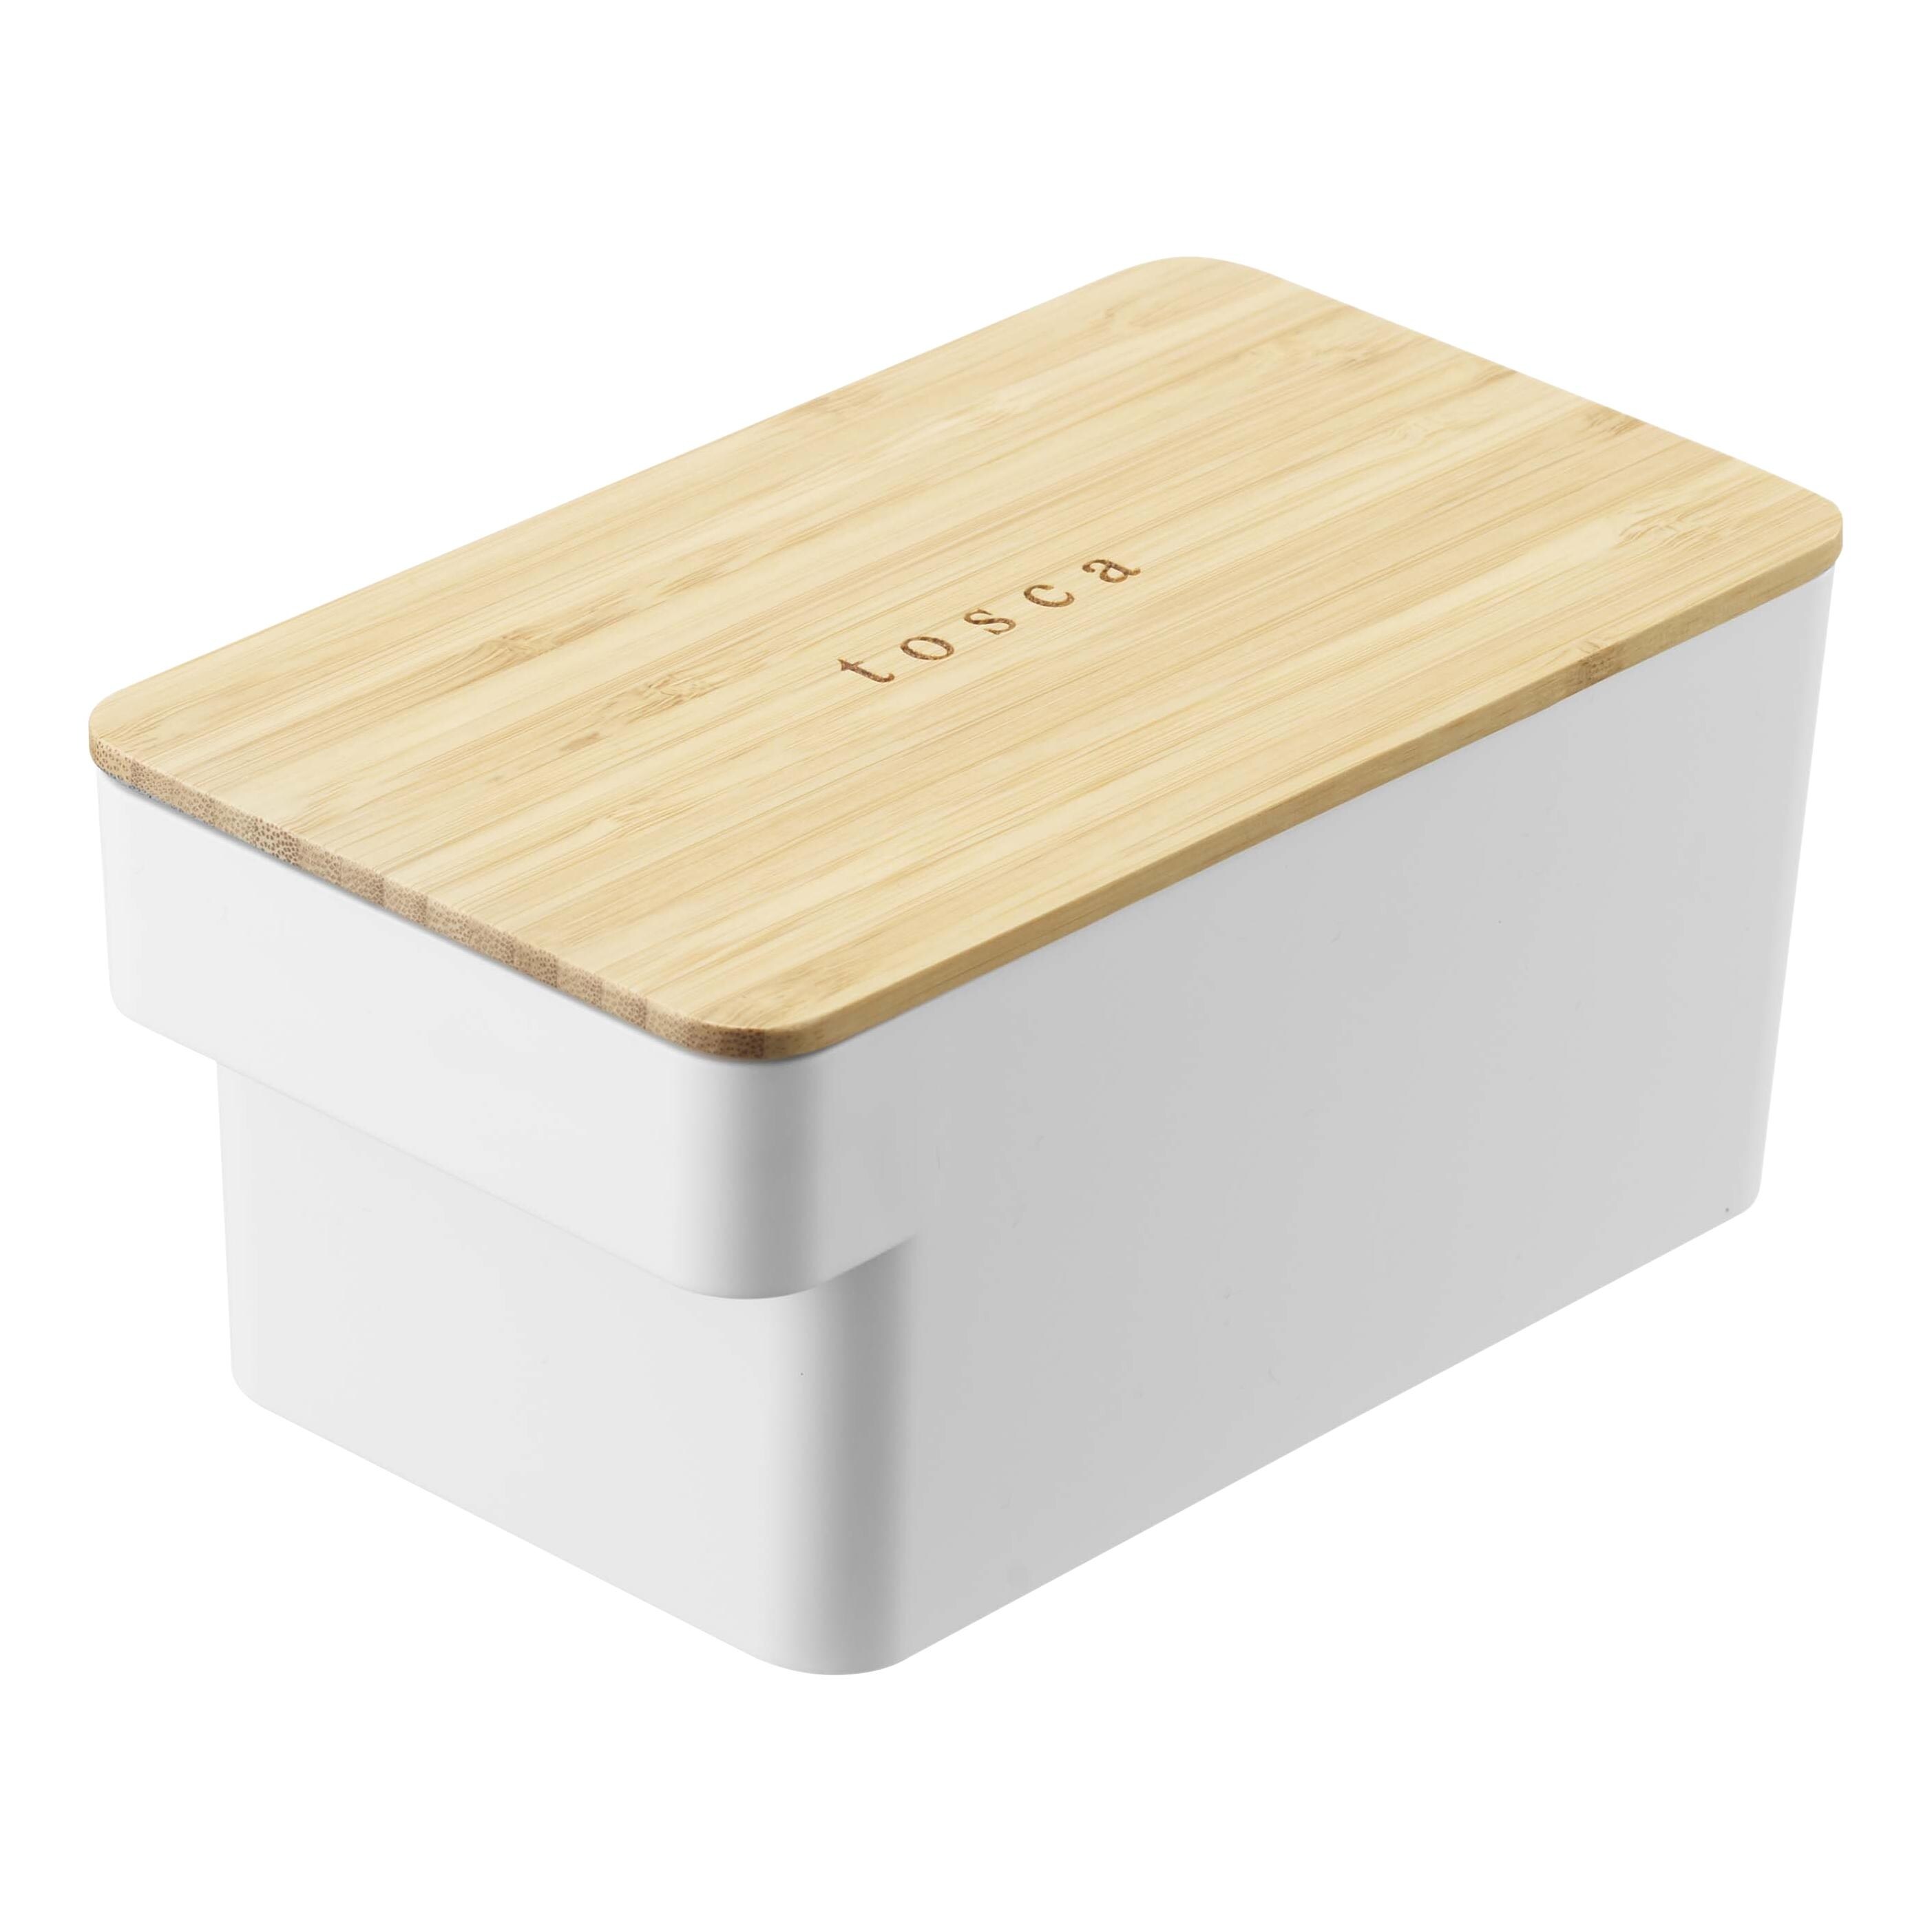 https://ak1.ostkcdn.com/images/products/is/images/direct/4791a8857c7b9eea7ecc06f7e69c284995bba022/Yamazaki-Home-Airtight-Food-Storage-Container---Bamboo-Lid%2C-Plastic-and-Wood.jpg